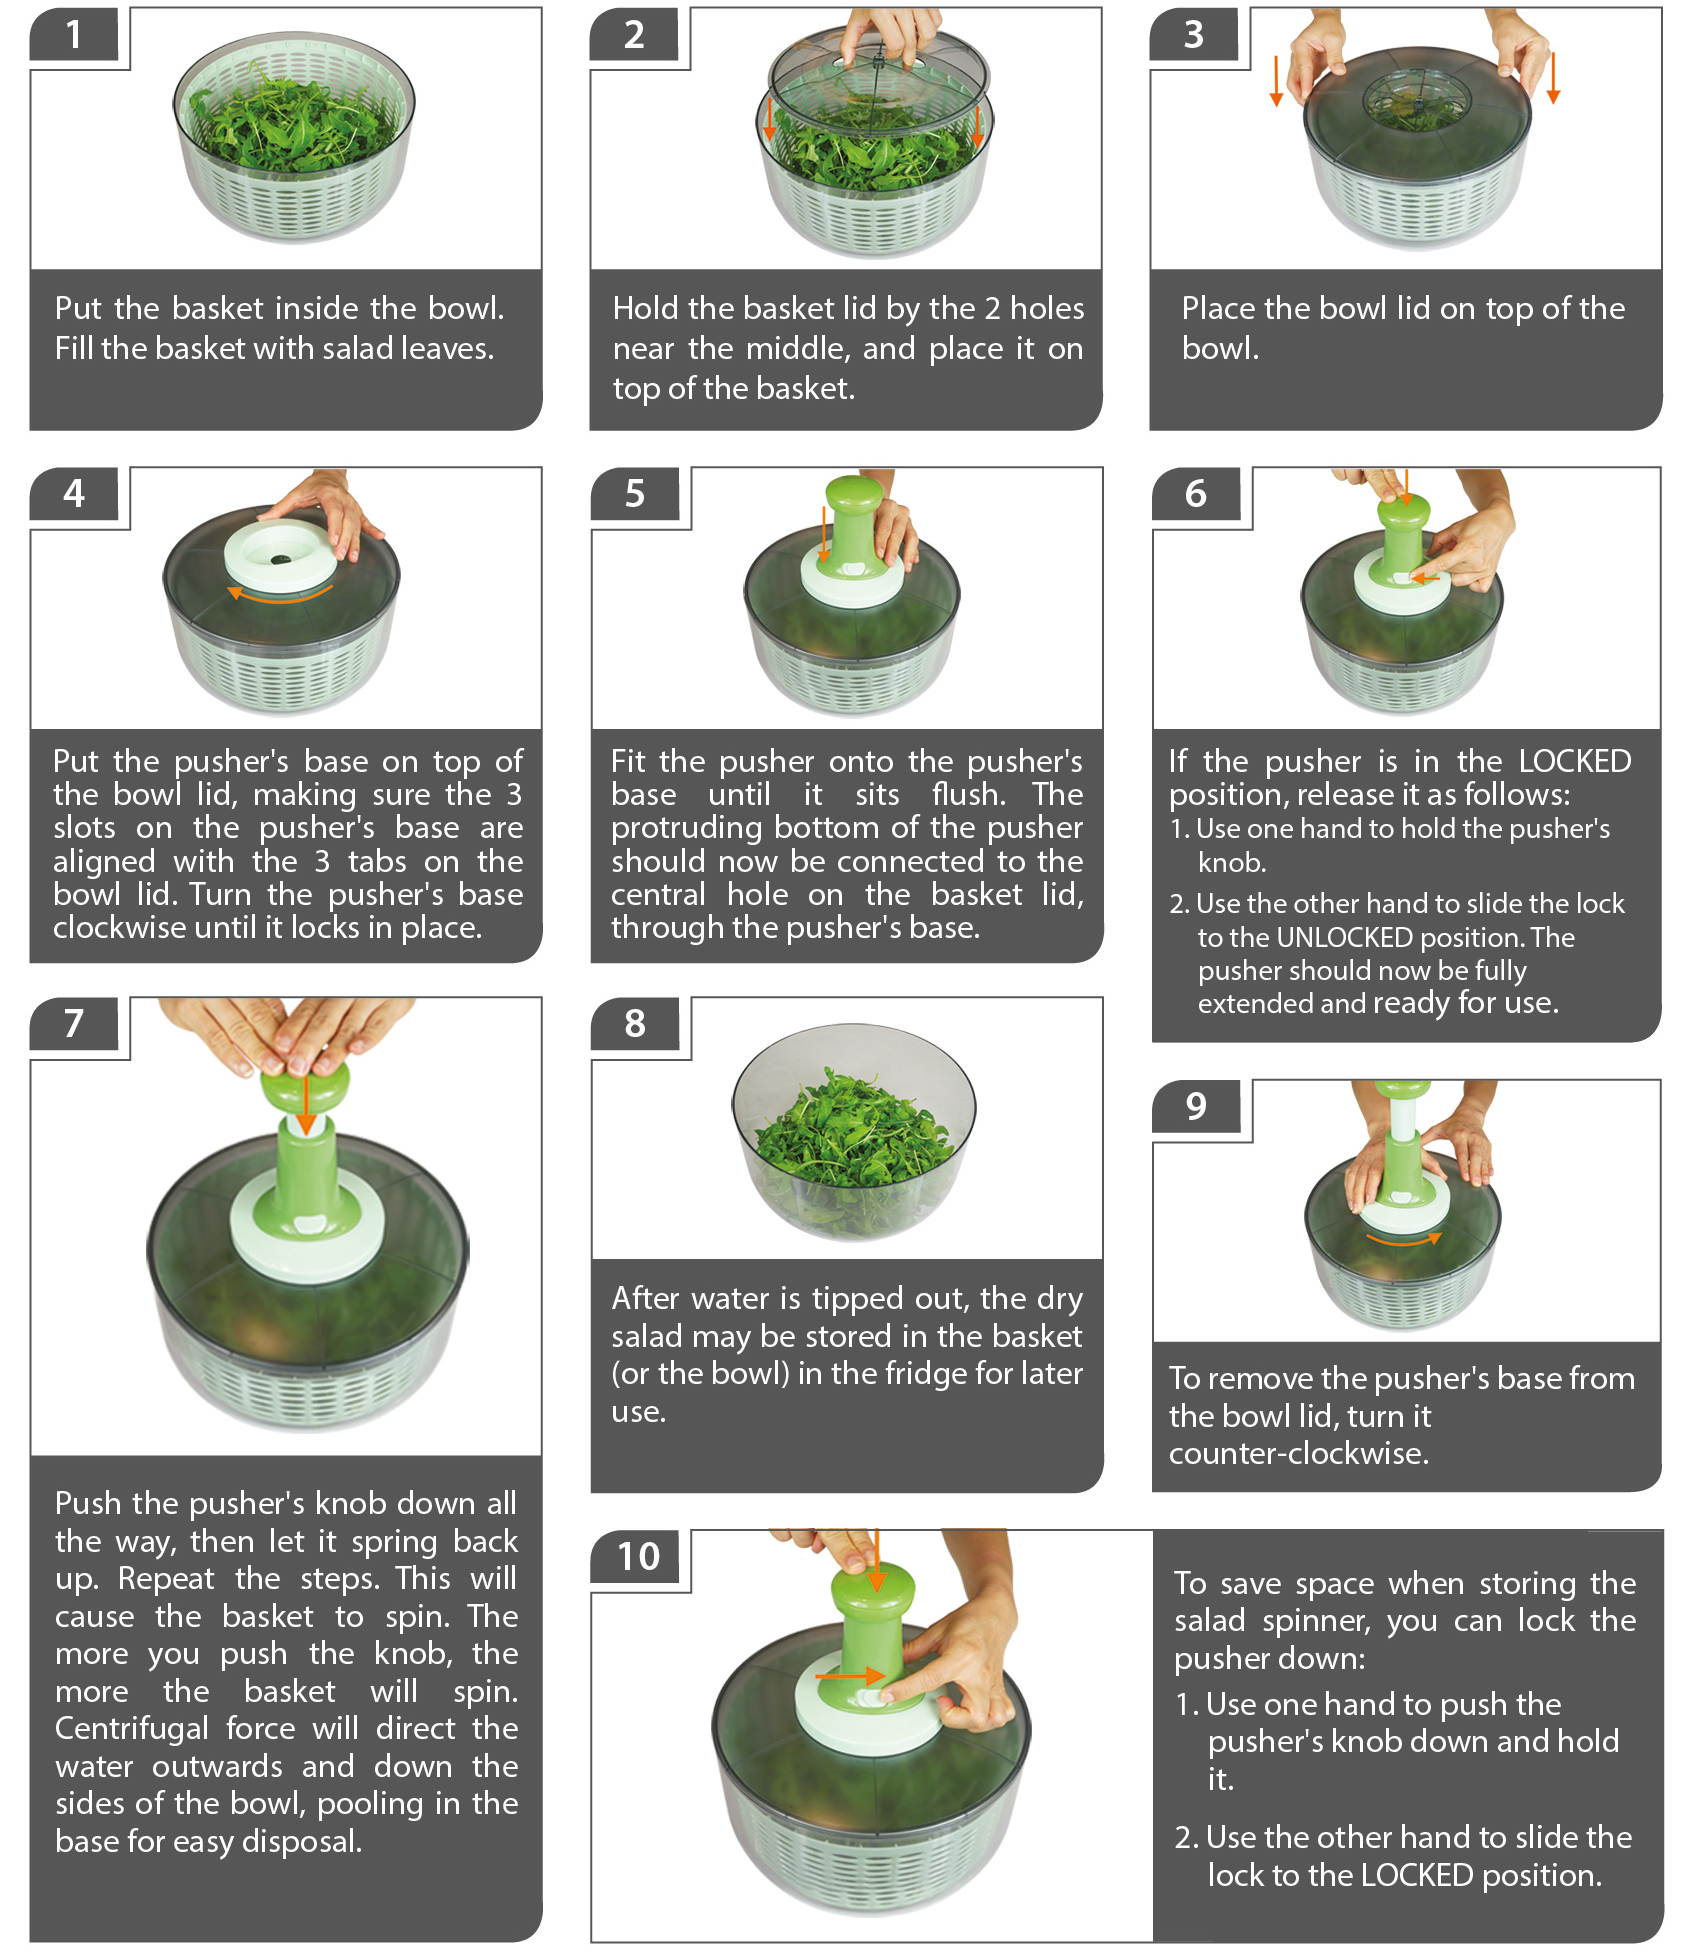 https://www.brieftons.com/wp-content/uploads/2021/04/Salad-spinner-how-to-use.png